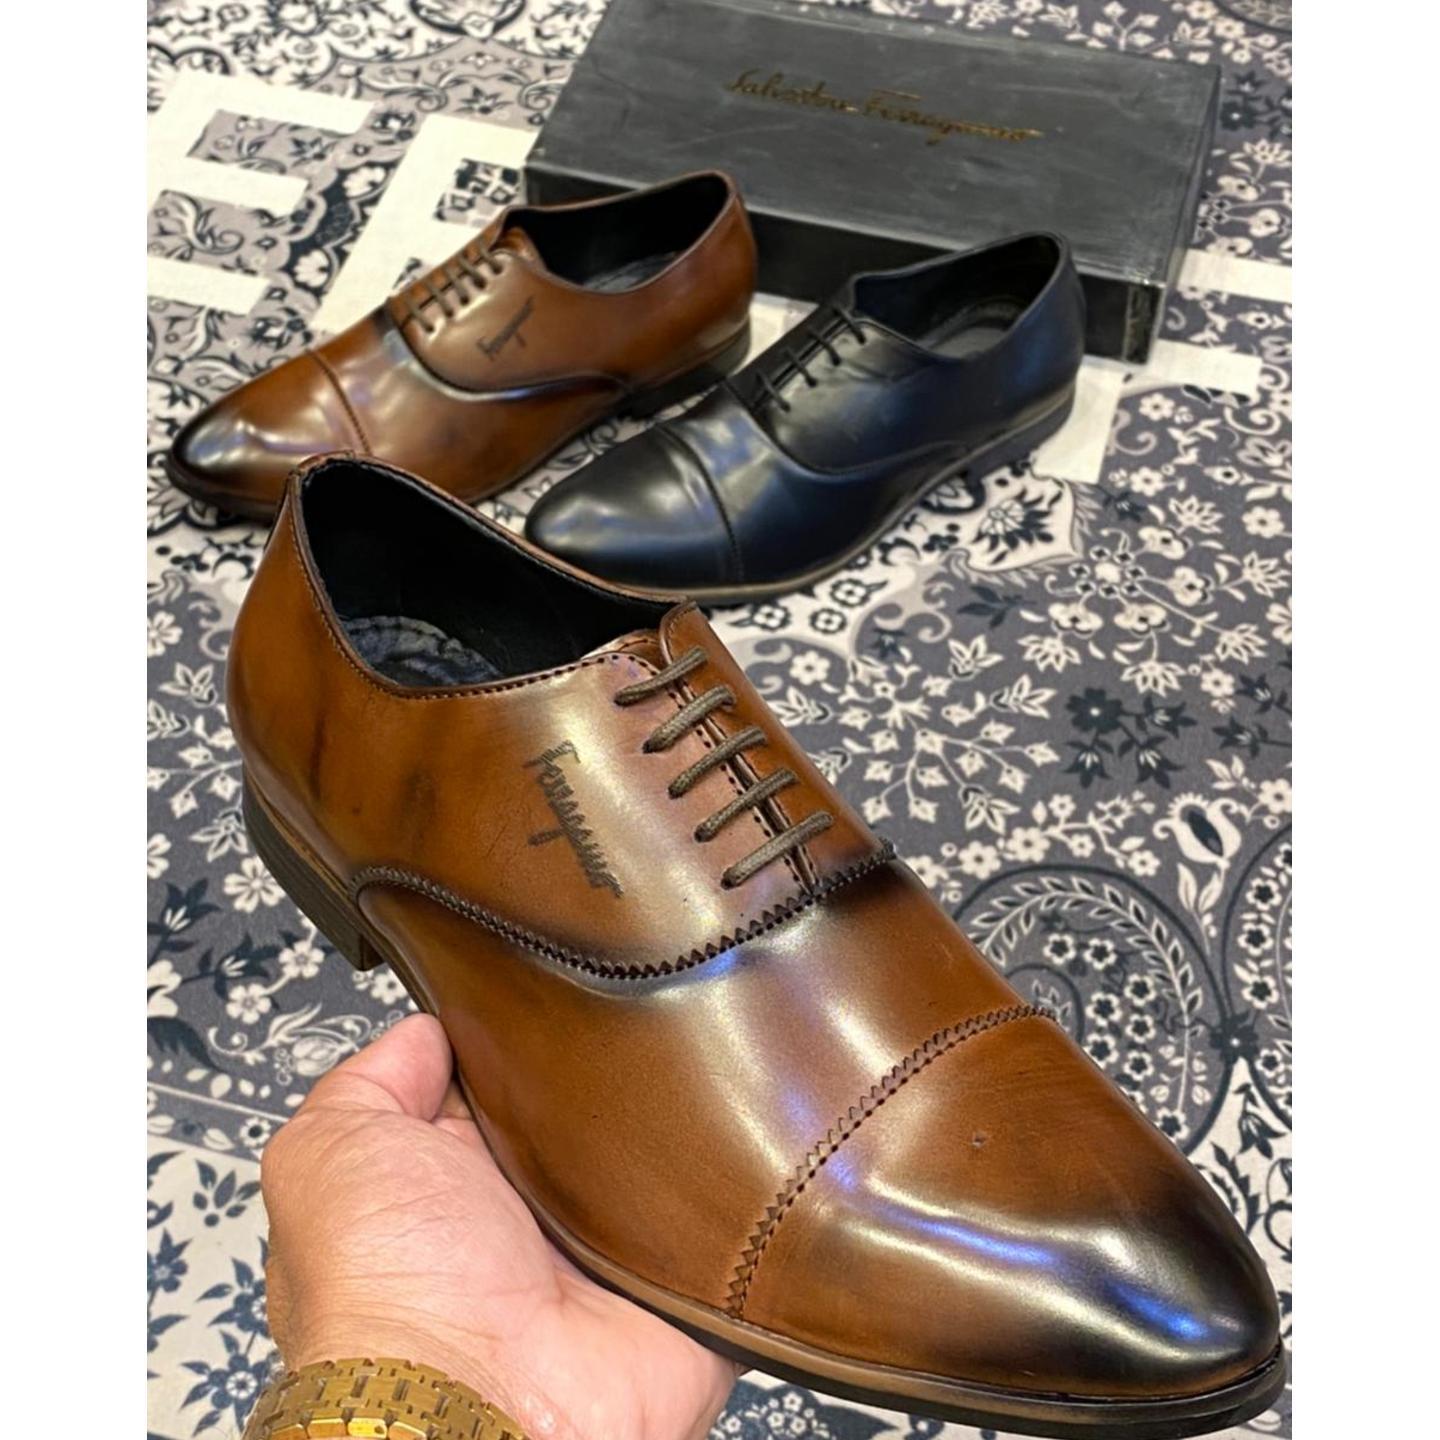 Insta Shoppee First Copy Classic Italian Derby Shoes for Men - Black and Brown